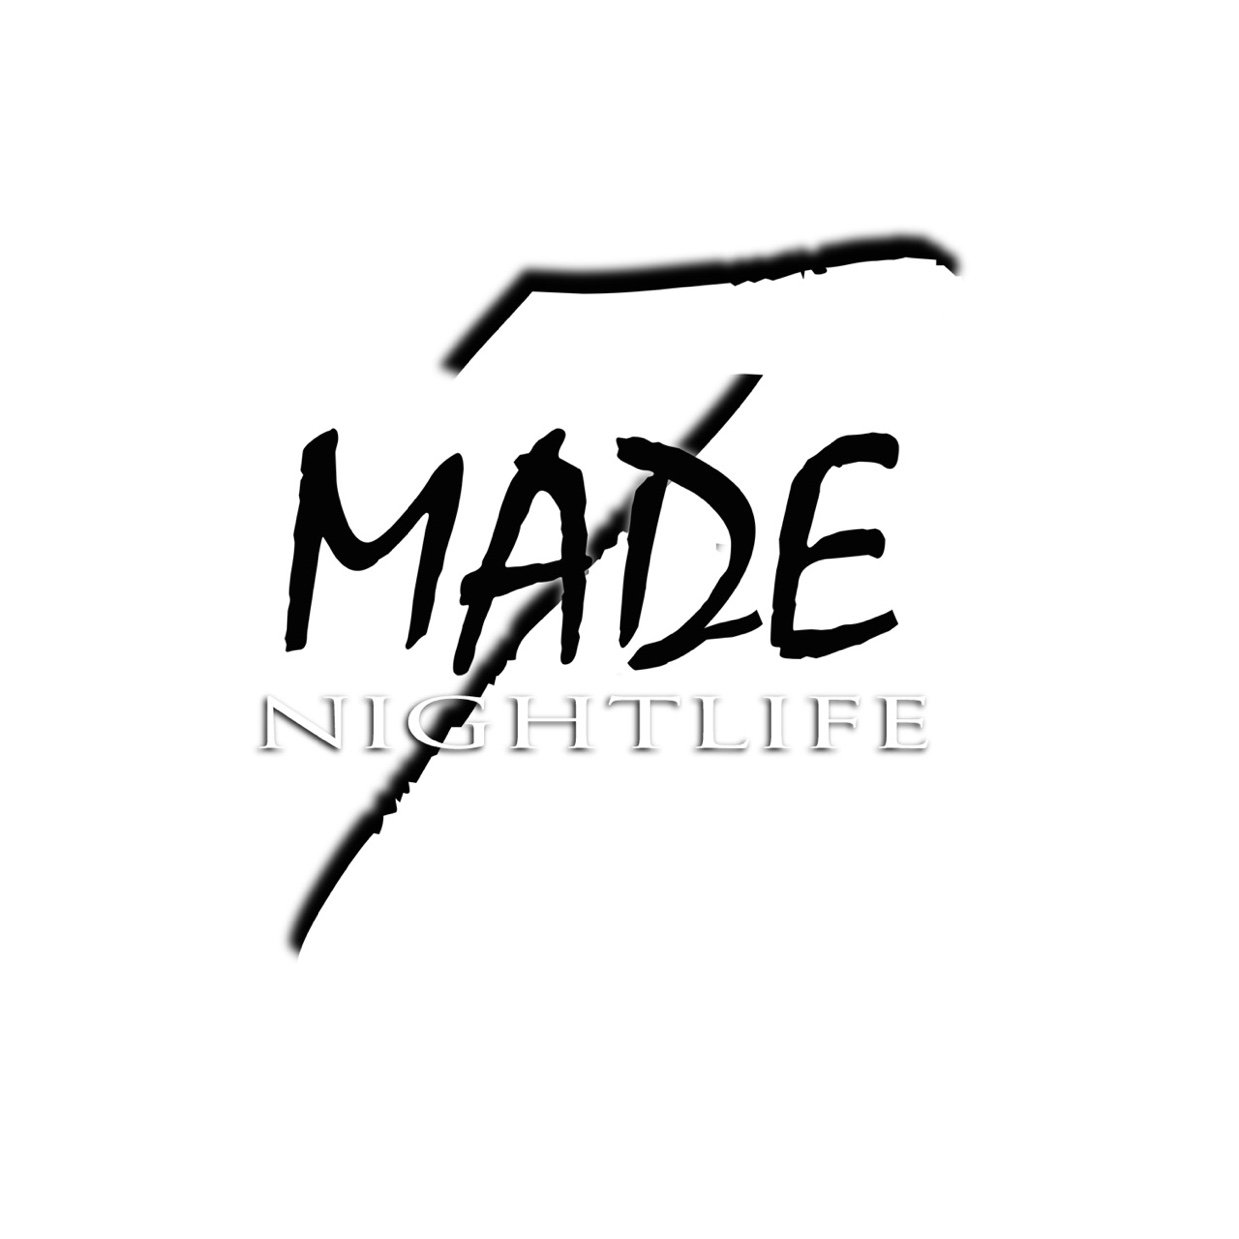 Made 7 NightLife, the event media solution.

Available for assignment globally.
I.G. -  @made7nightlife  
made7nightlife@gmail.com